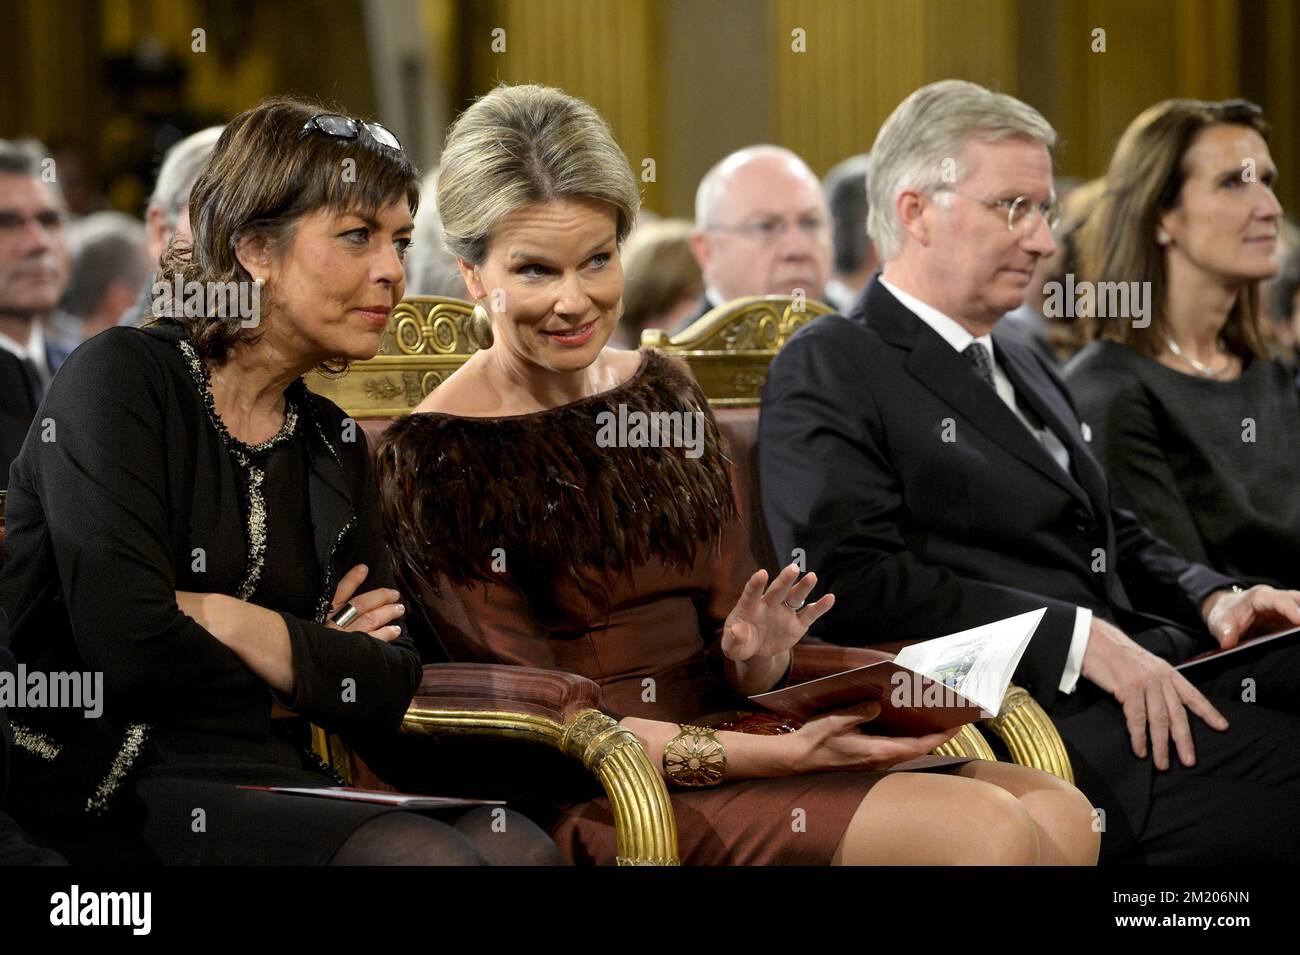 20151021 - BRUSSELS, BELGIUM: Federation Wallonia - Brussels Minister Joelle Milquet, Queen Mathilde of Belgium and King Philippe - Filip of Belgium pictured during the autumn concert at the Royal Palace, in Brussels, Wednesday 21 October 2015. BELGA PHOTO DIRK WAEM Stock Photo